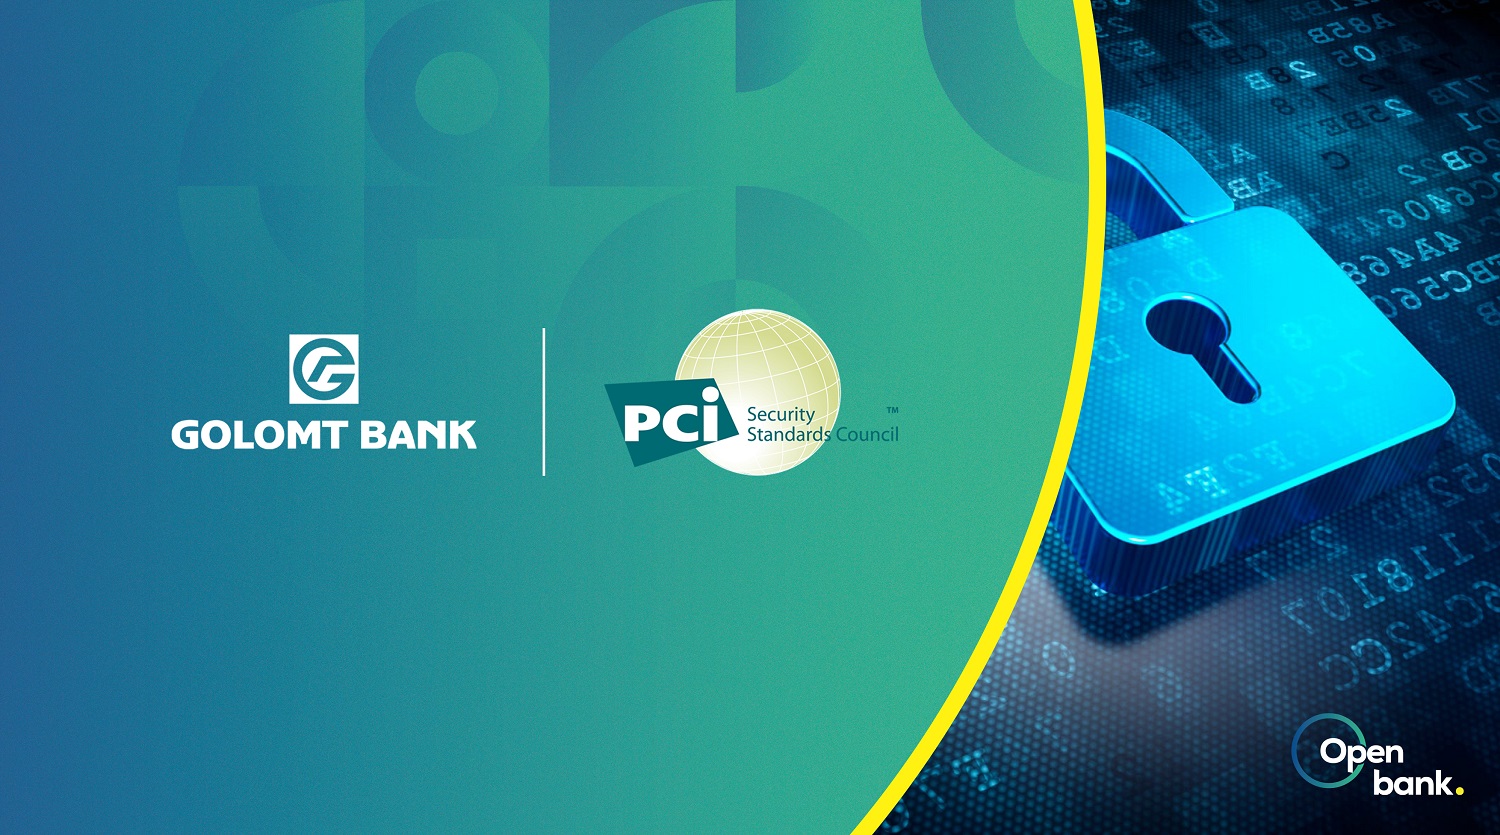 Golomt Bank joins the PCI Security Standards Council as a new participating organization